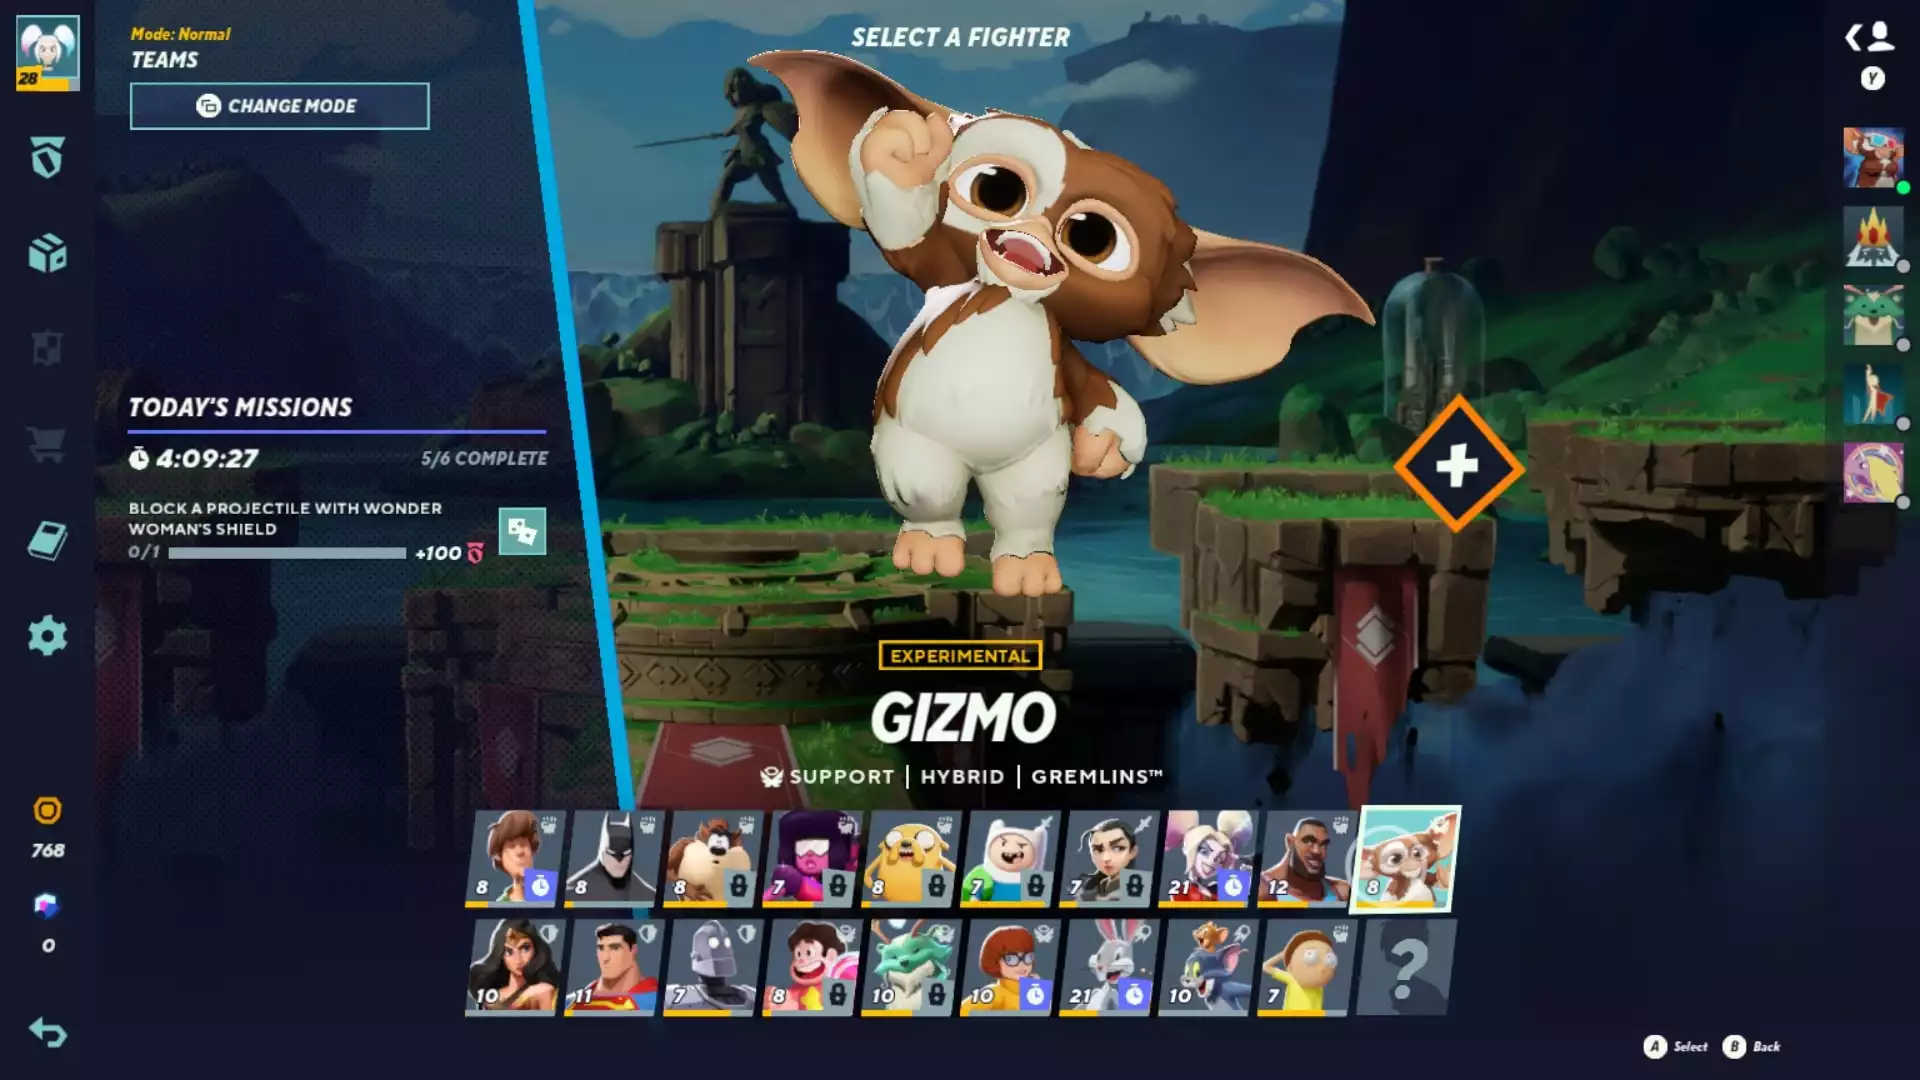 MultiVersus Gizmo combos, perks & specials